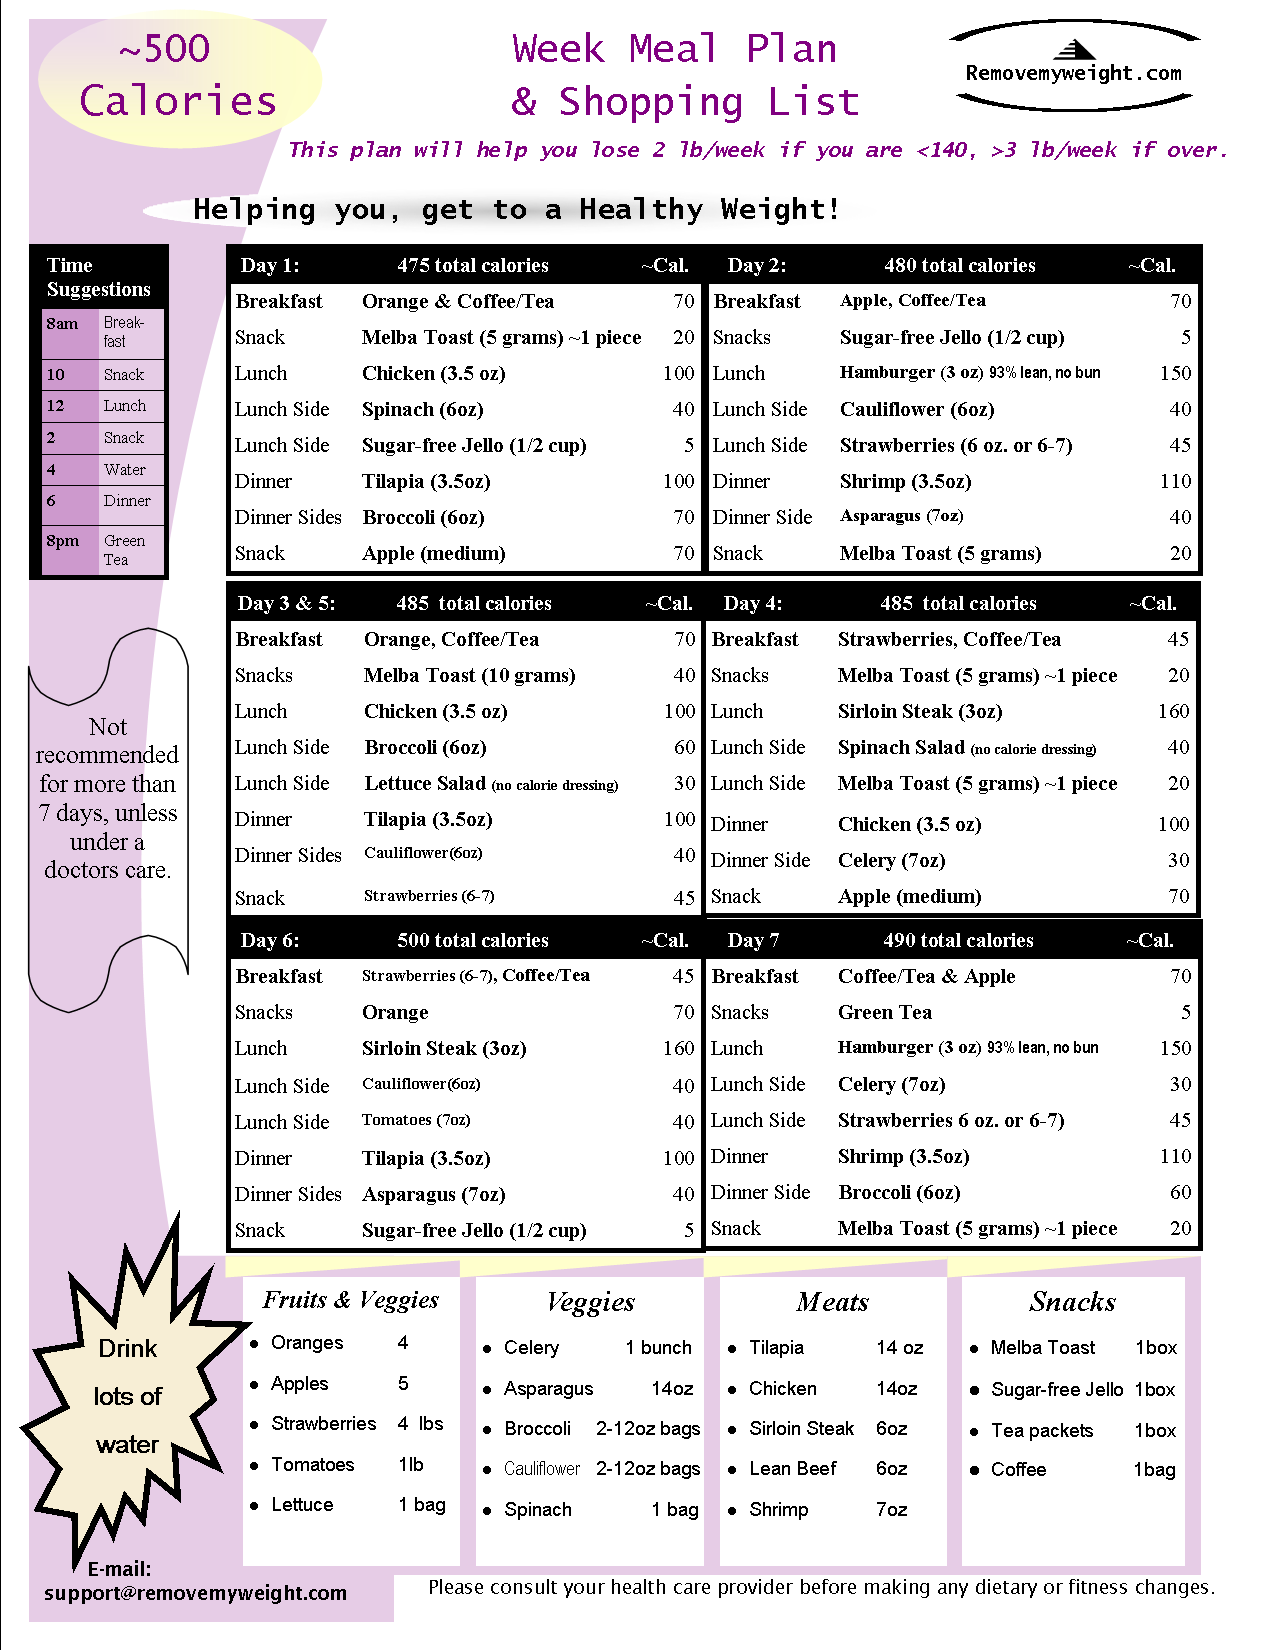 HCG Diet Meal Plan - Day 3 - Menu Plan for Weight Loss